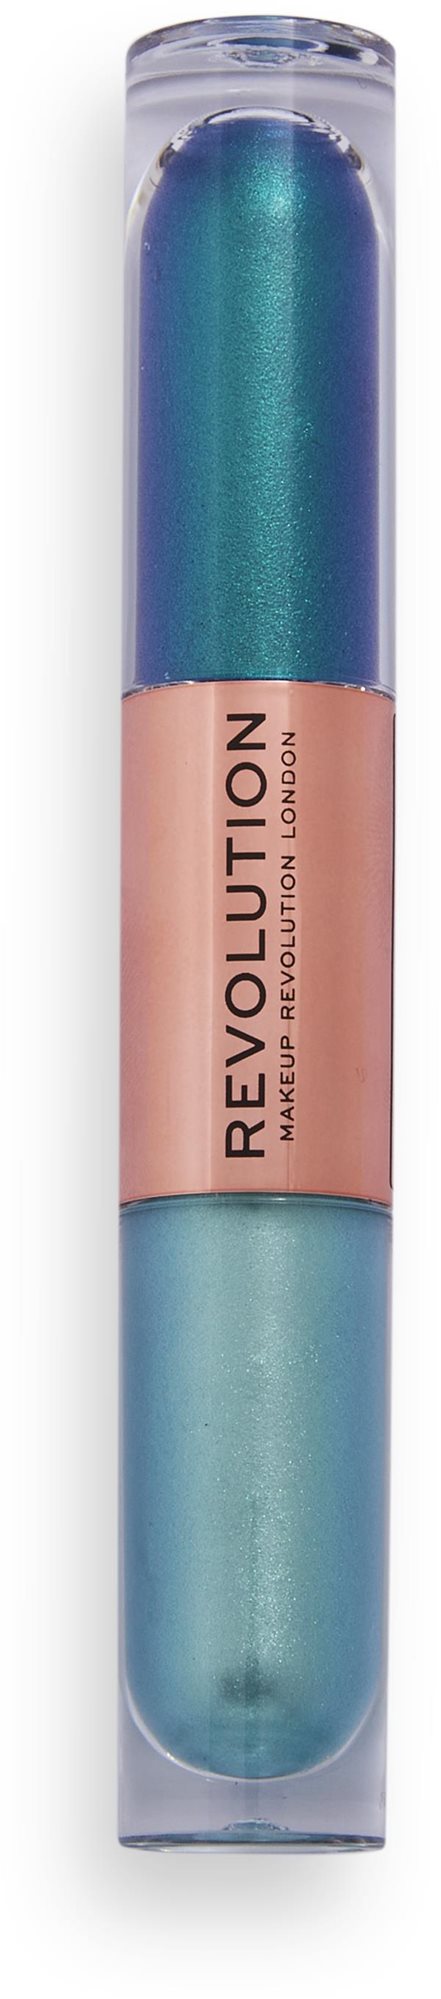 REVOLUTION Double Up Liquid Shadow Tranquillity Blue